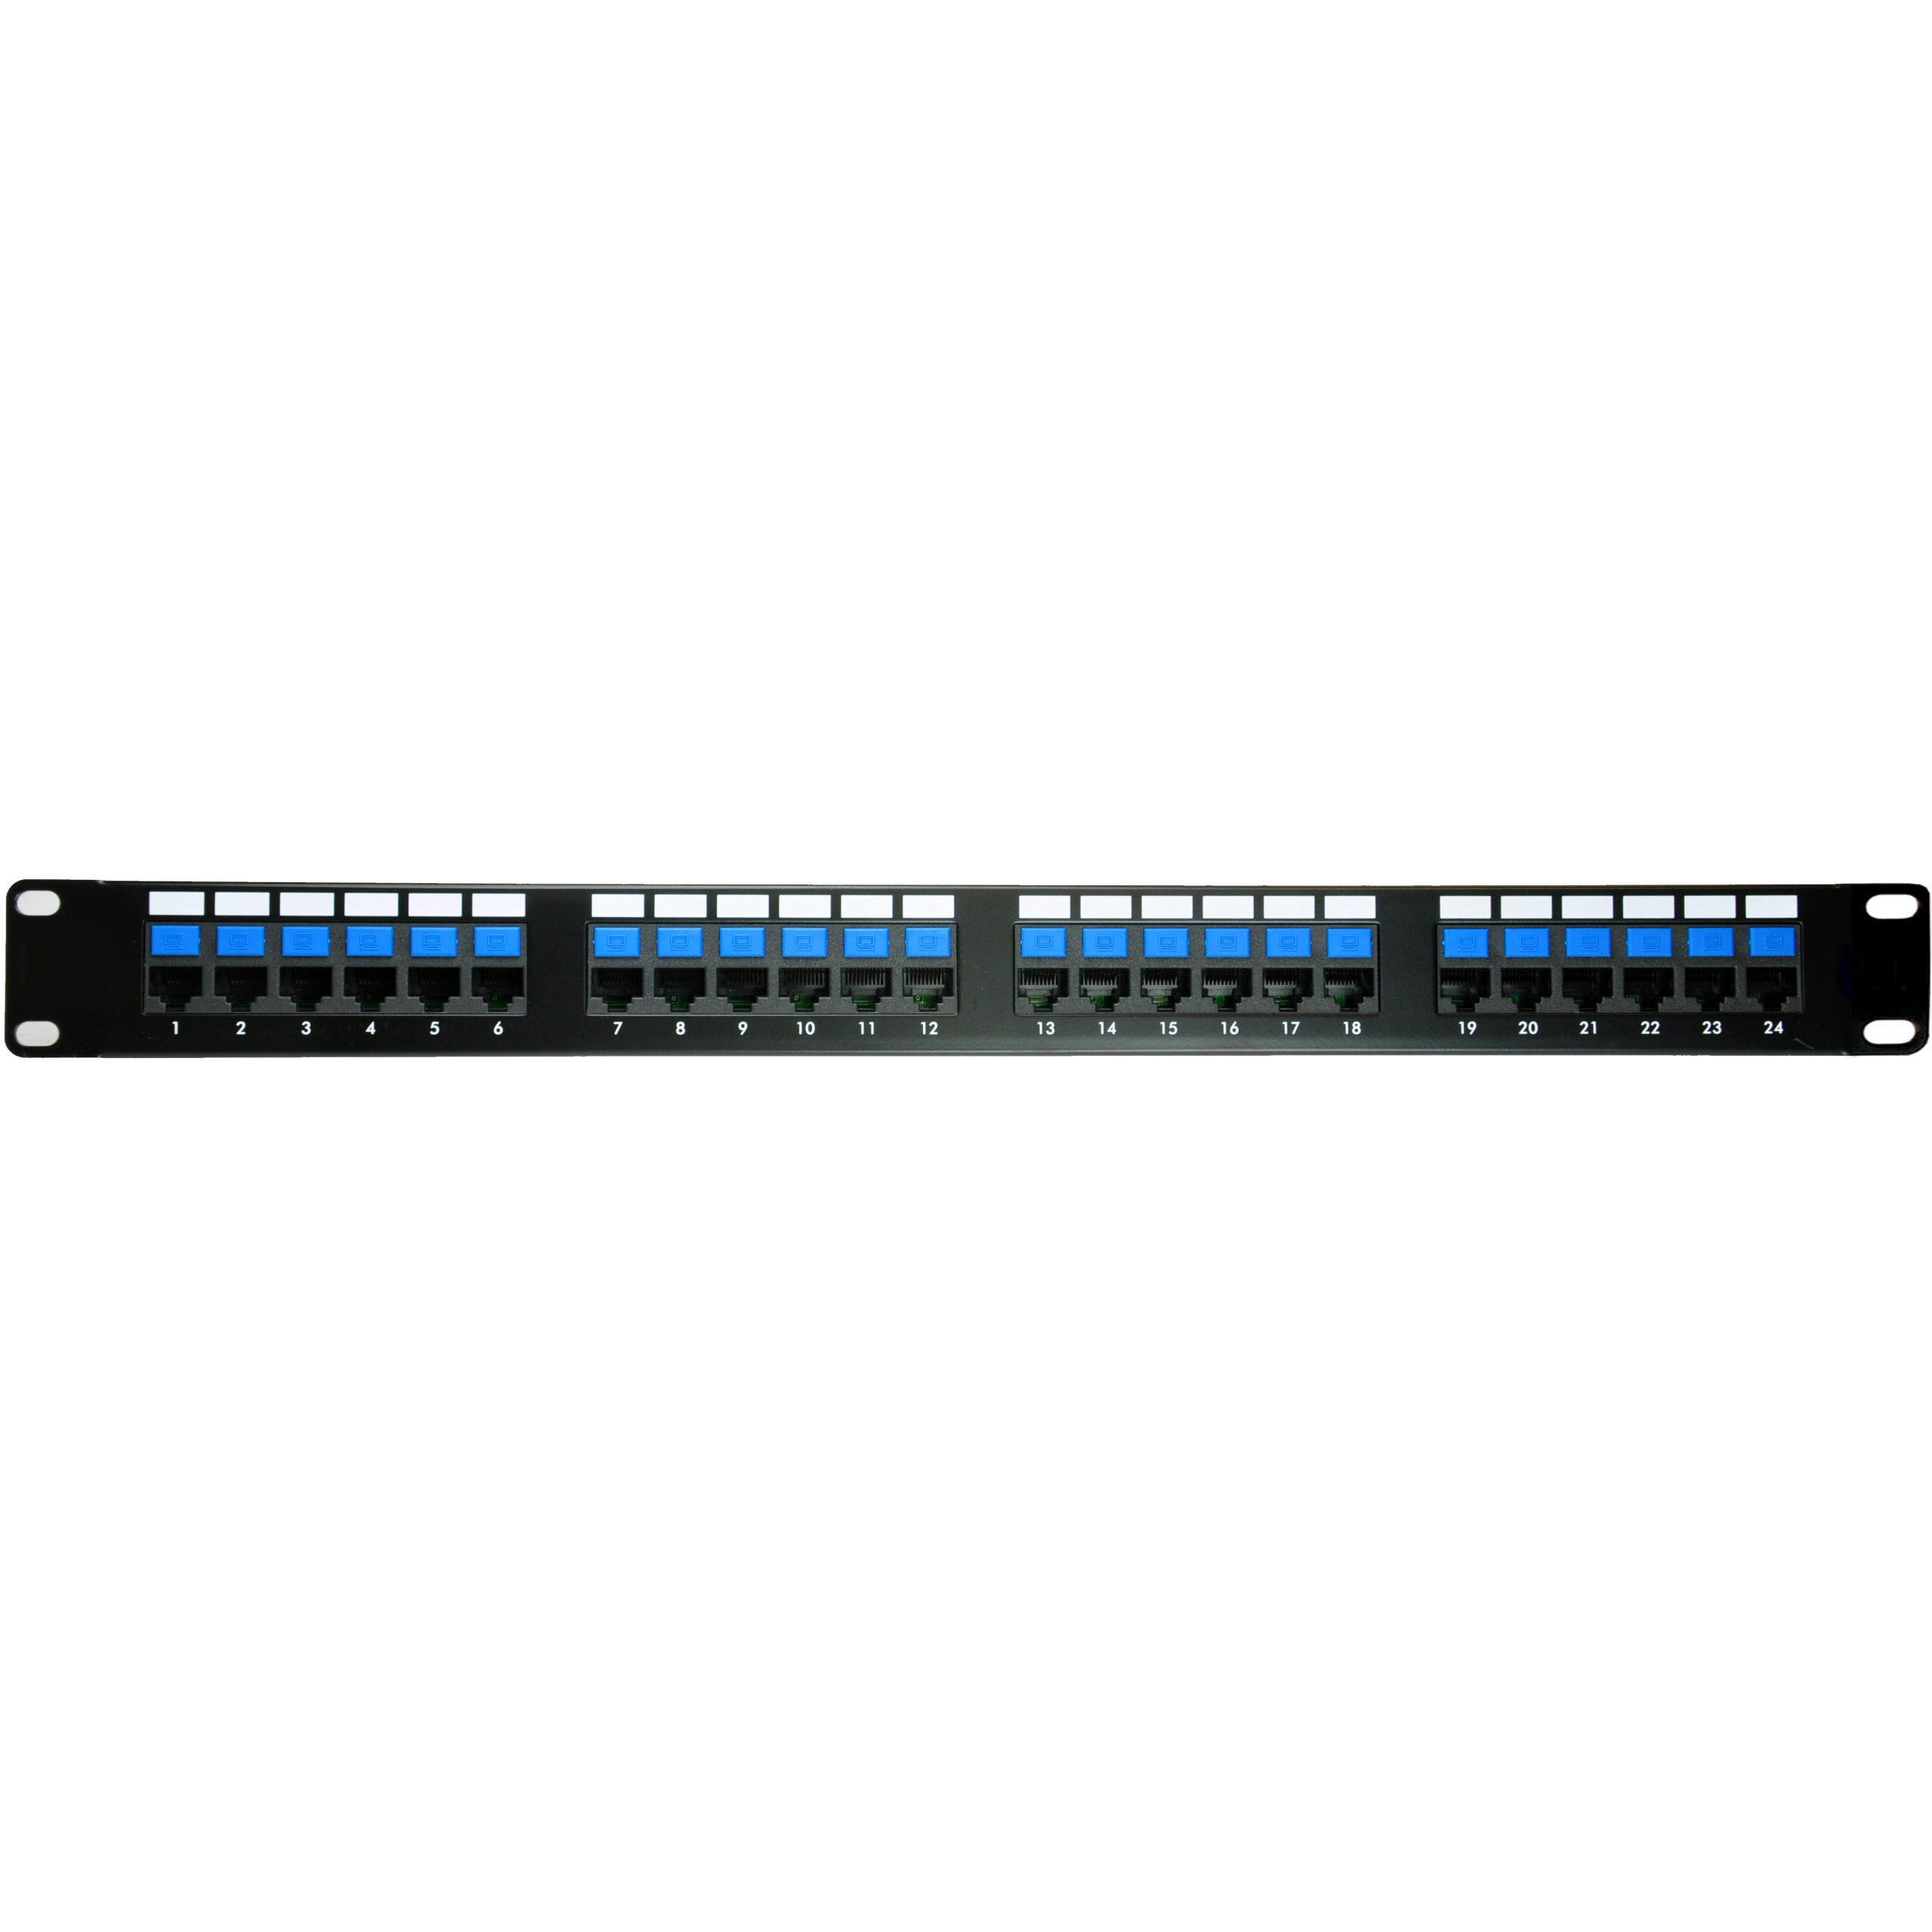 110 patch panel visio template